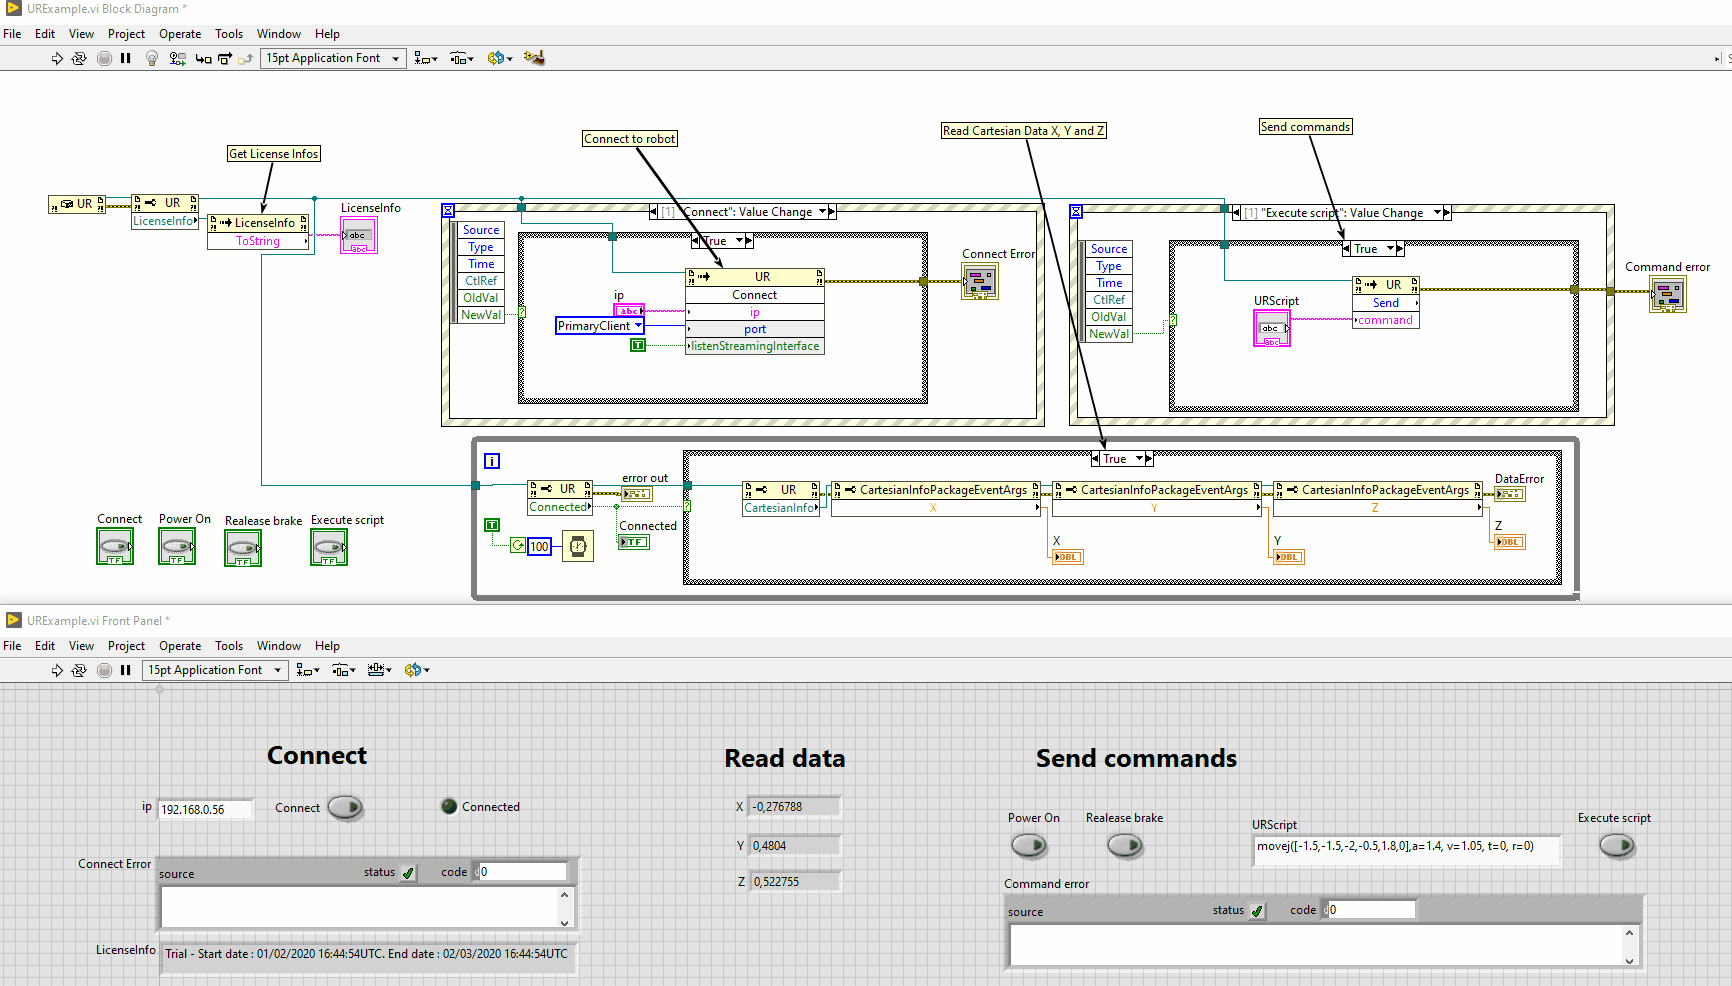 LabVIEW example